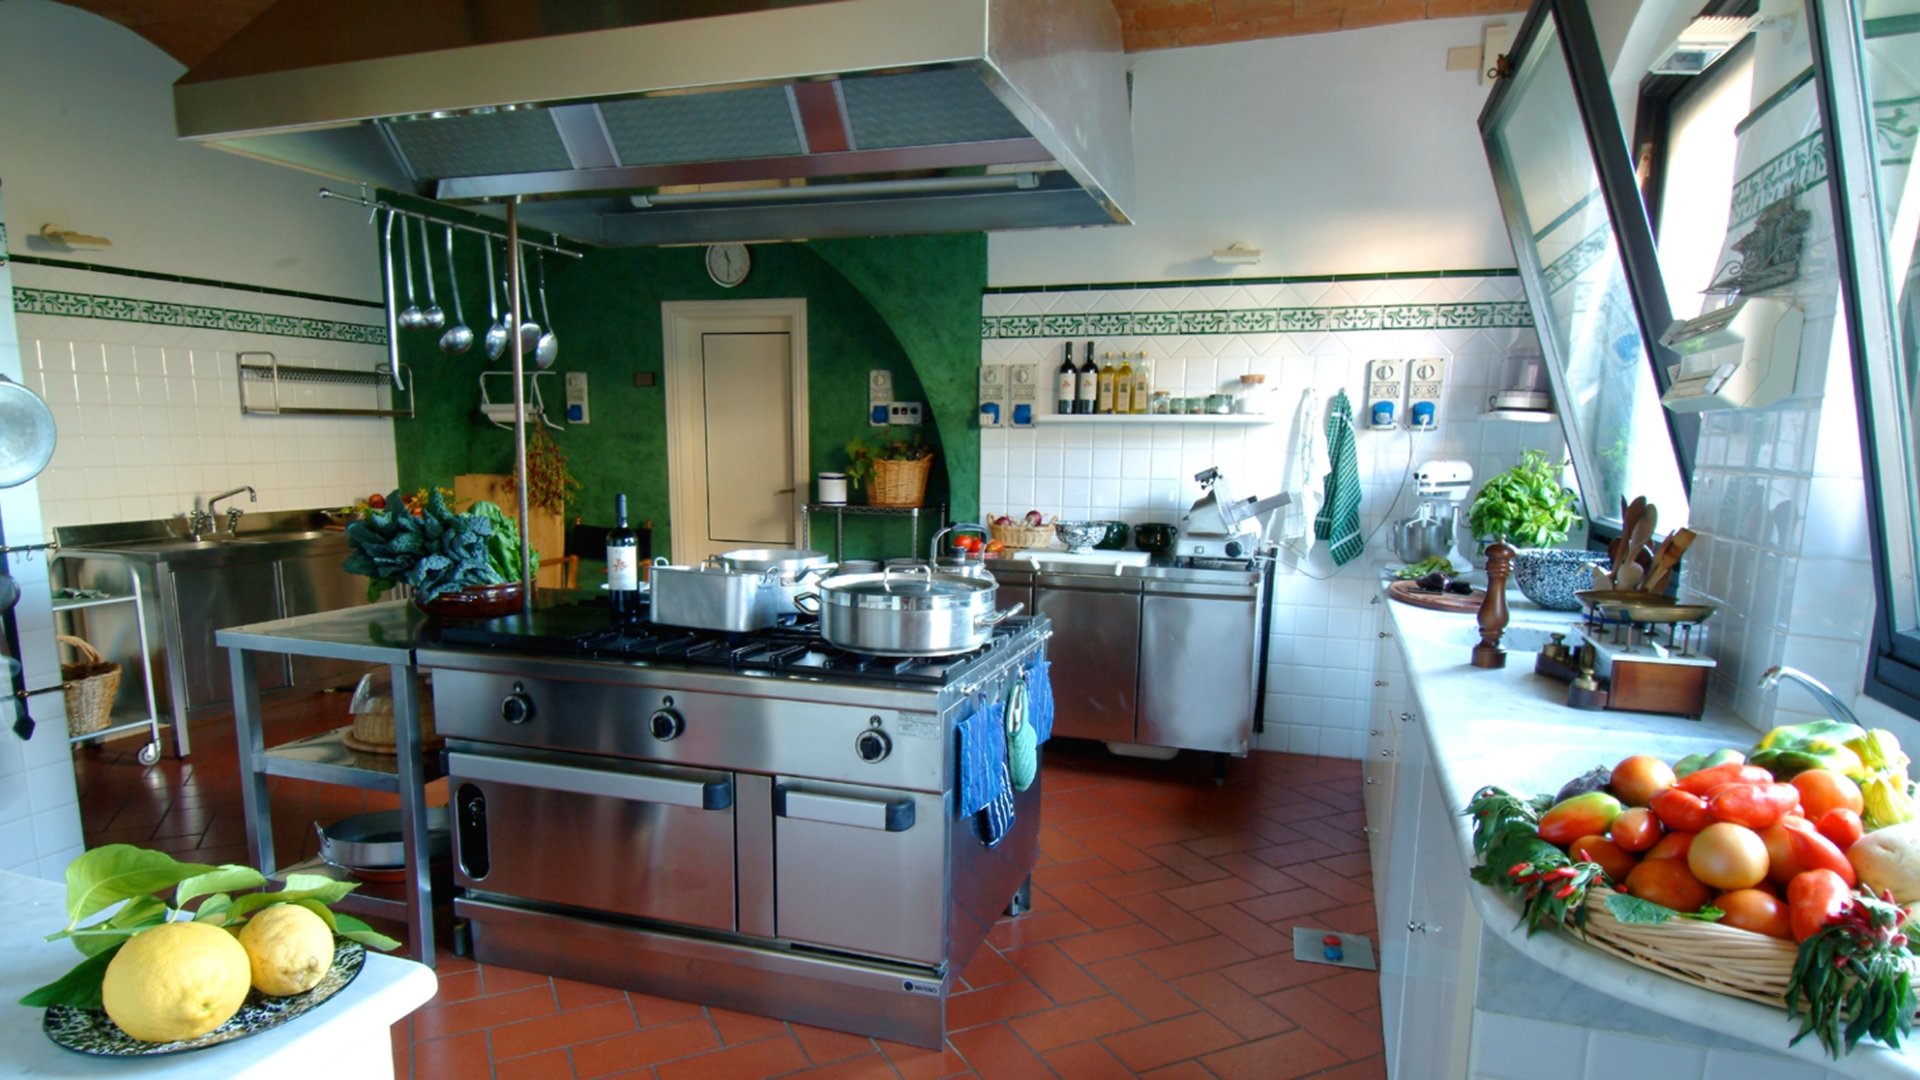 Cooking class to learn typical Tuscan recipes hosted in a farm on the hills of Val di Pesa